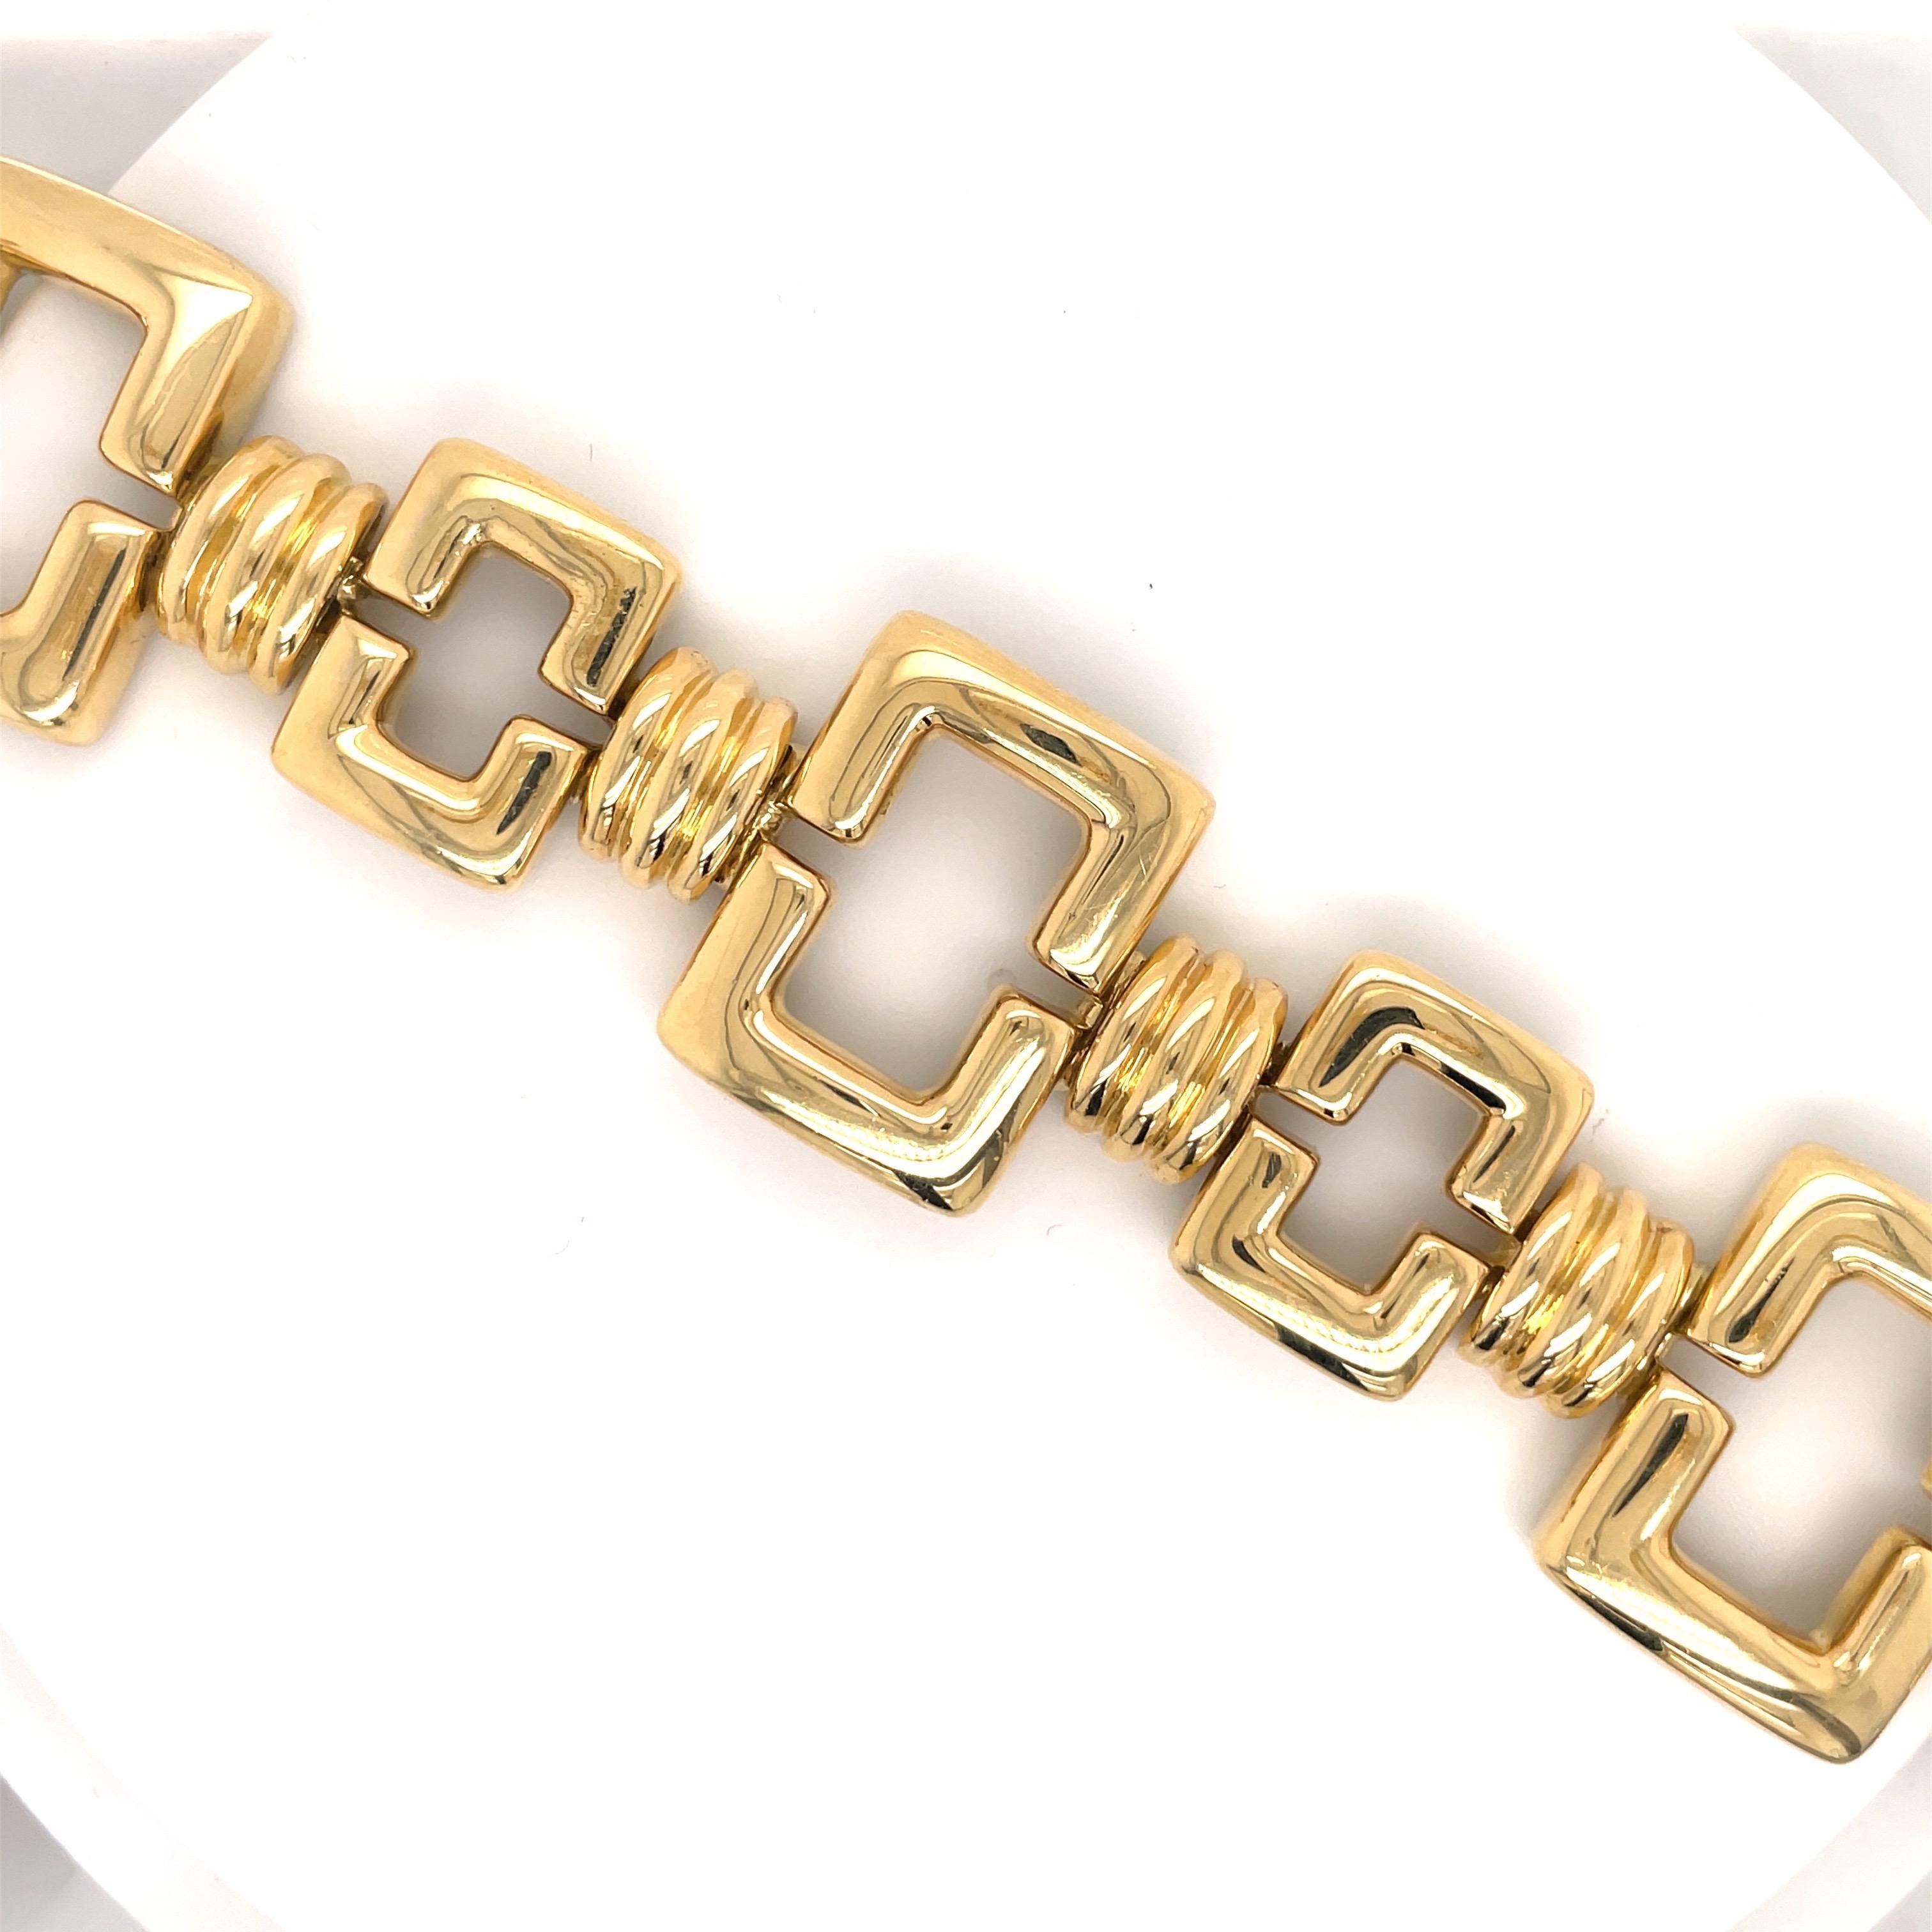 This vintage bracelet features alternating big & small rectangular links weighing 104.6 grams. 
Big Links measure 0.75 inches x 1.25 inches
Smaller Links measure 0.50 inches x 0.75 inches